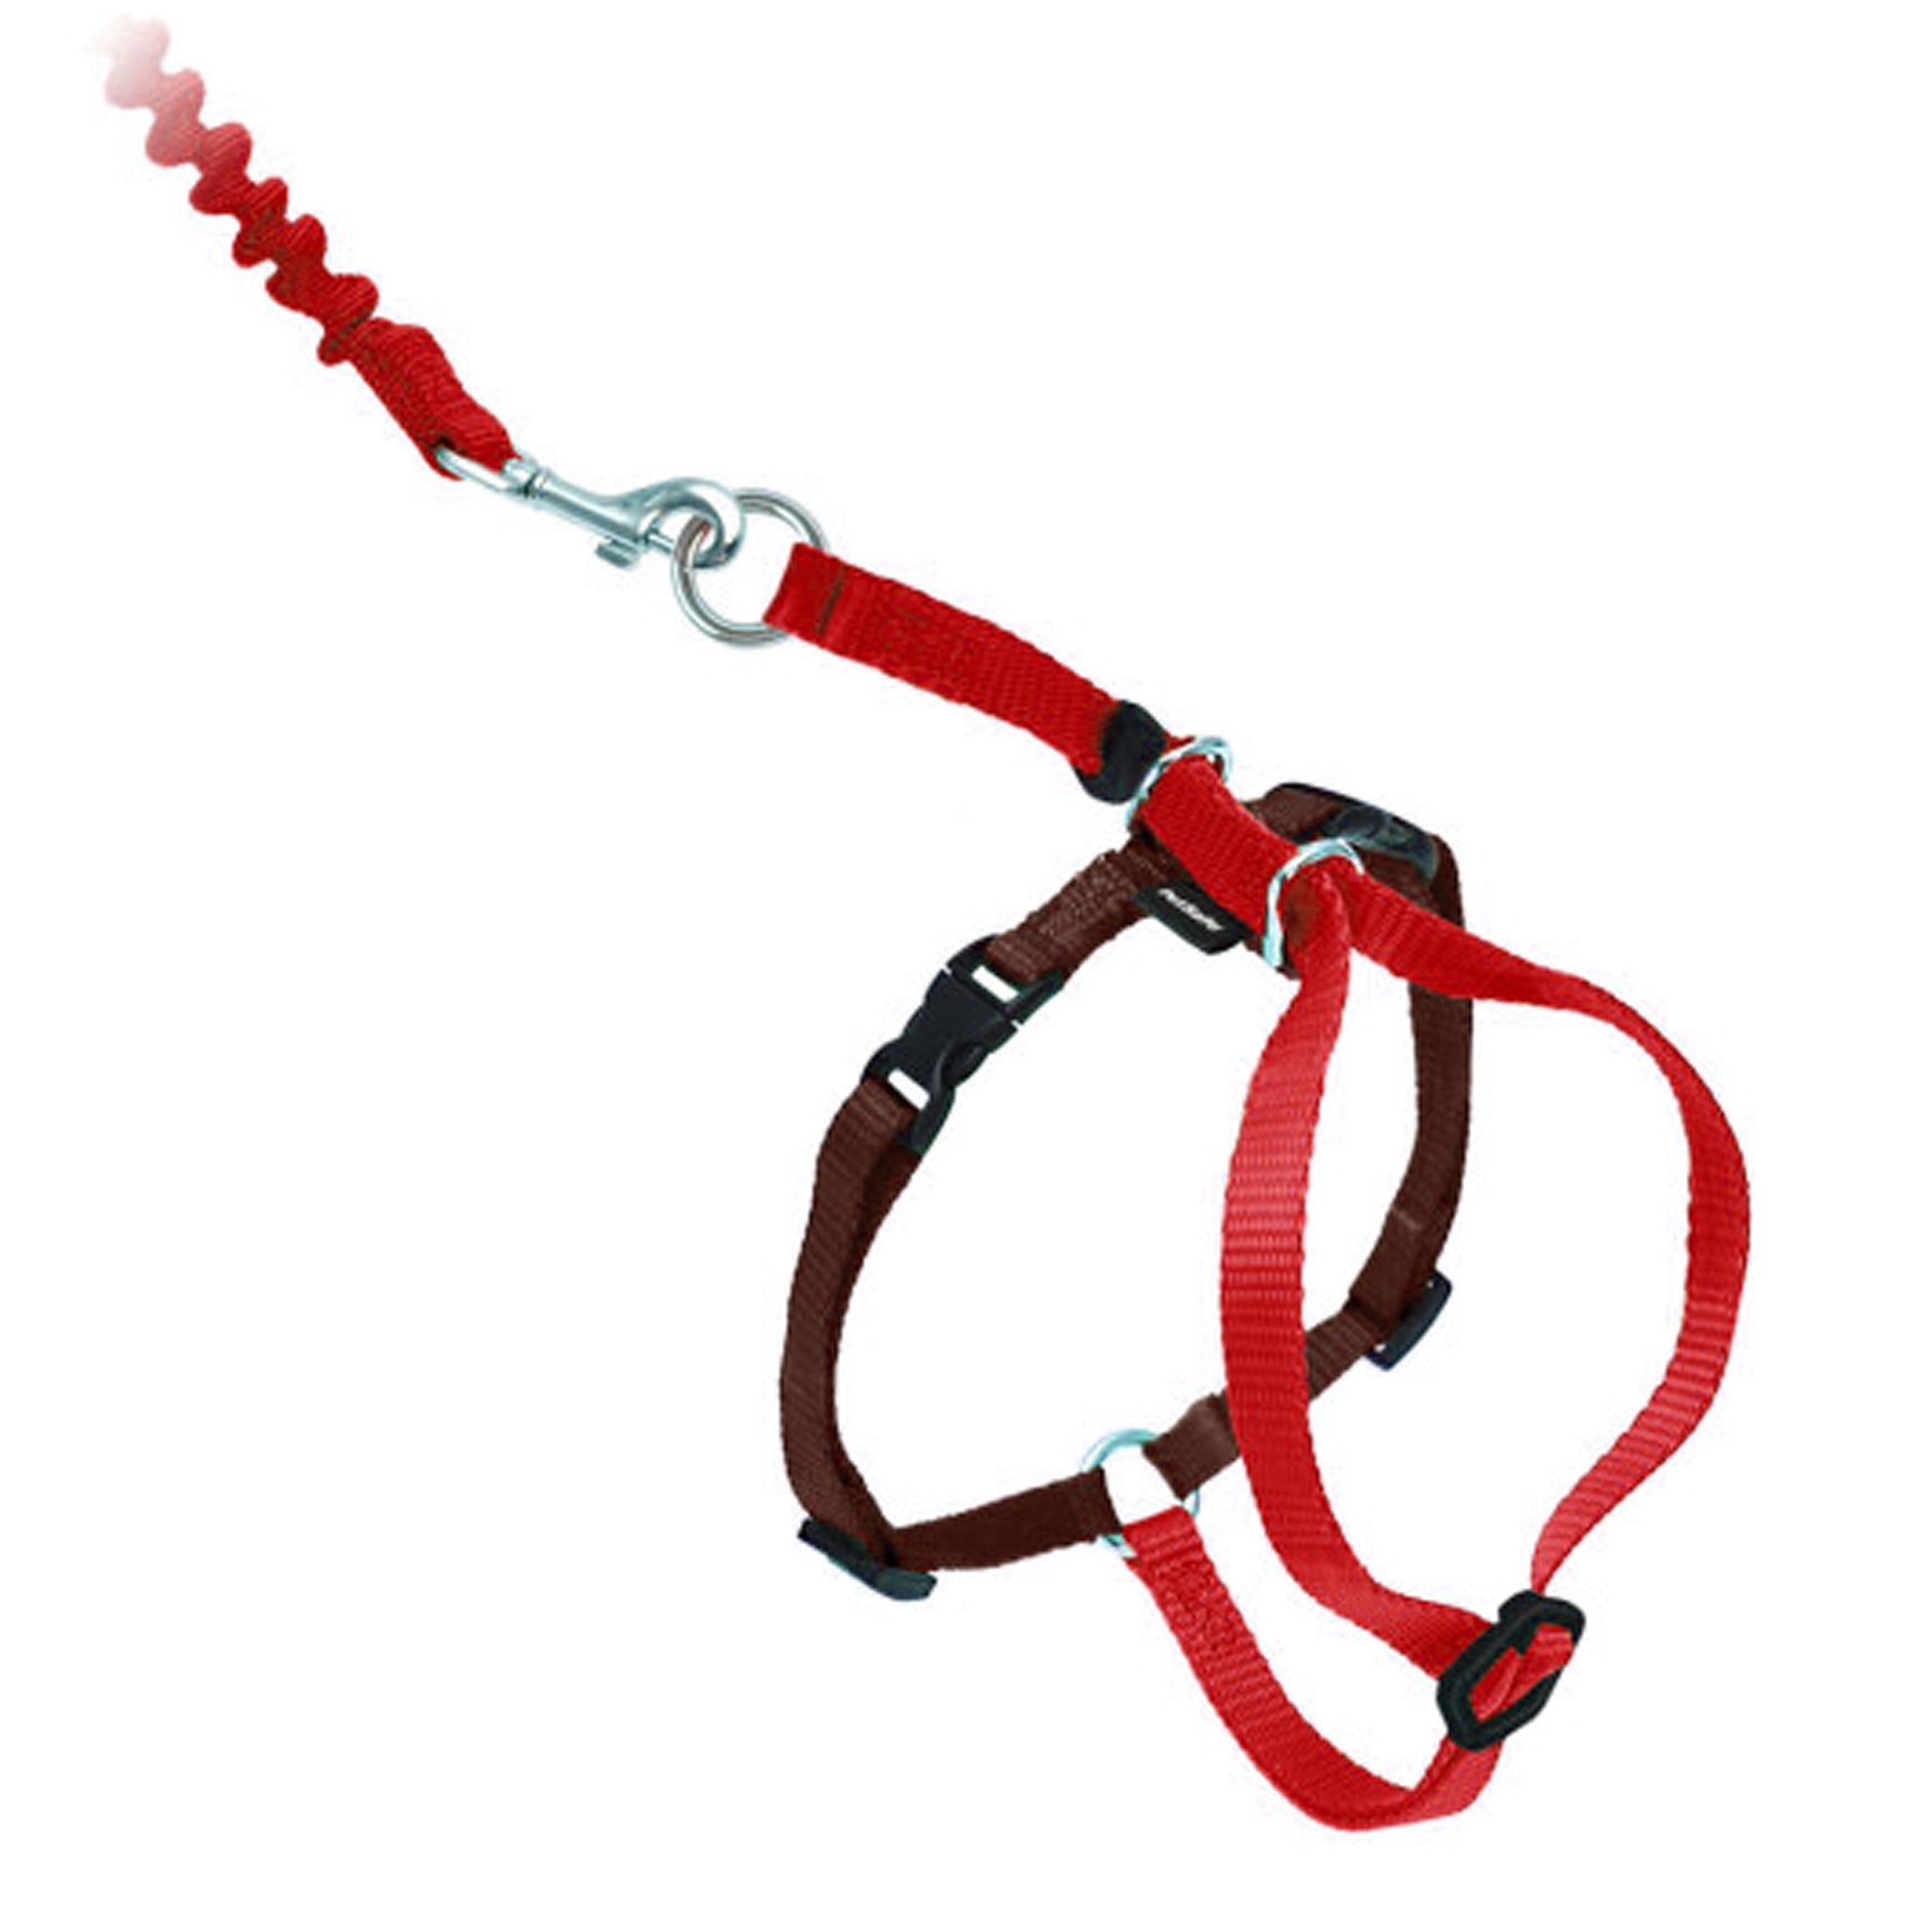 PetSafe Come with Me Kitty Nylon Cat Harness & Bungee Leash